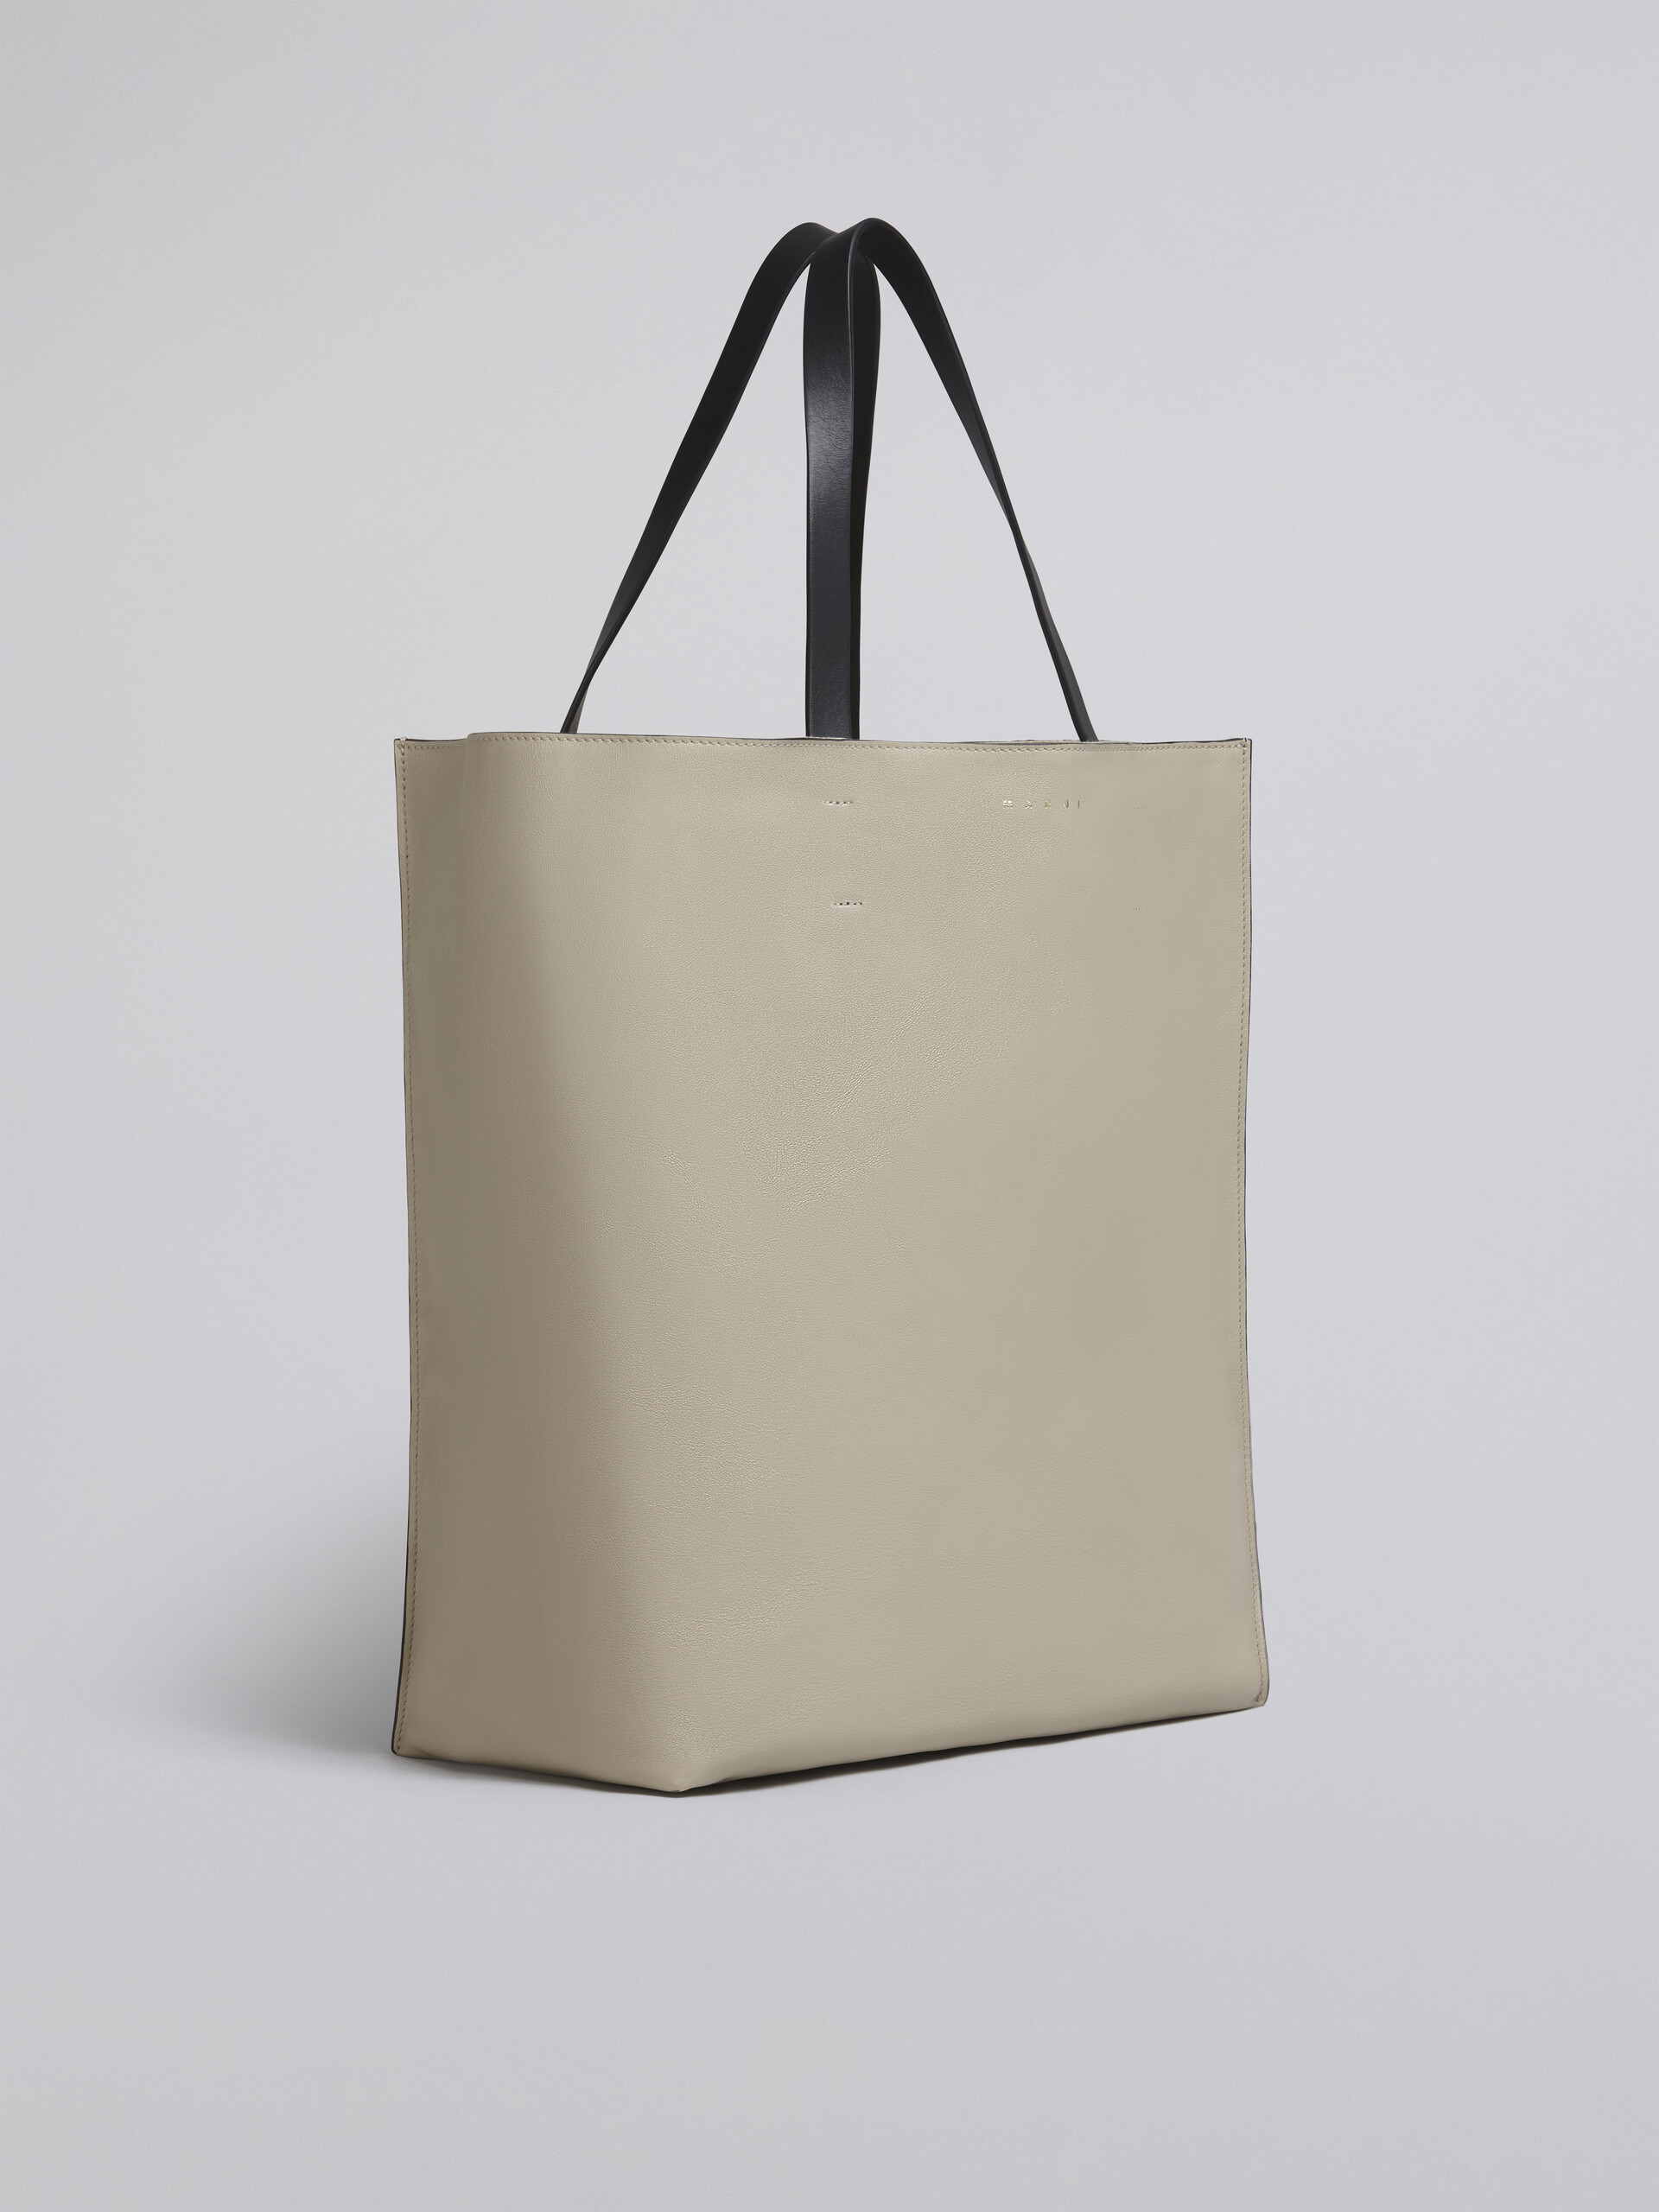 MUSEO SOFT large bag in white and red leather - Shopping Bags - Image 6